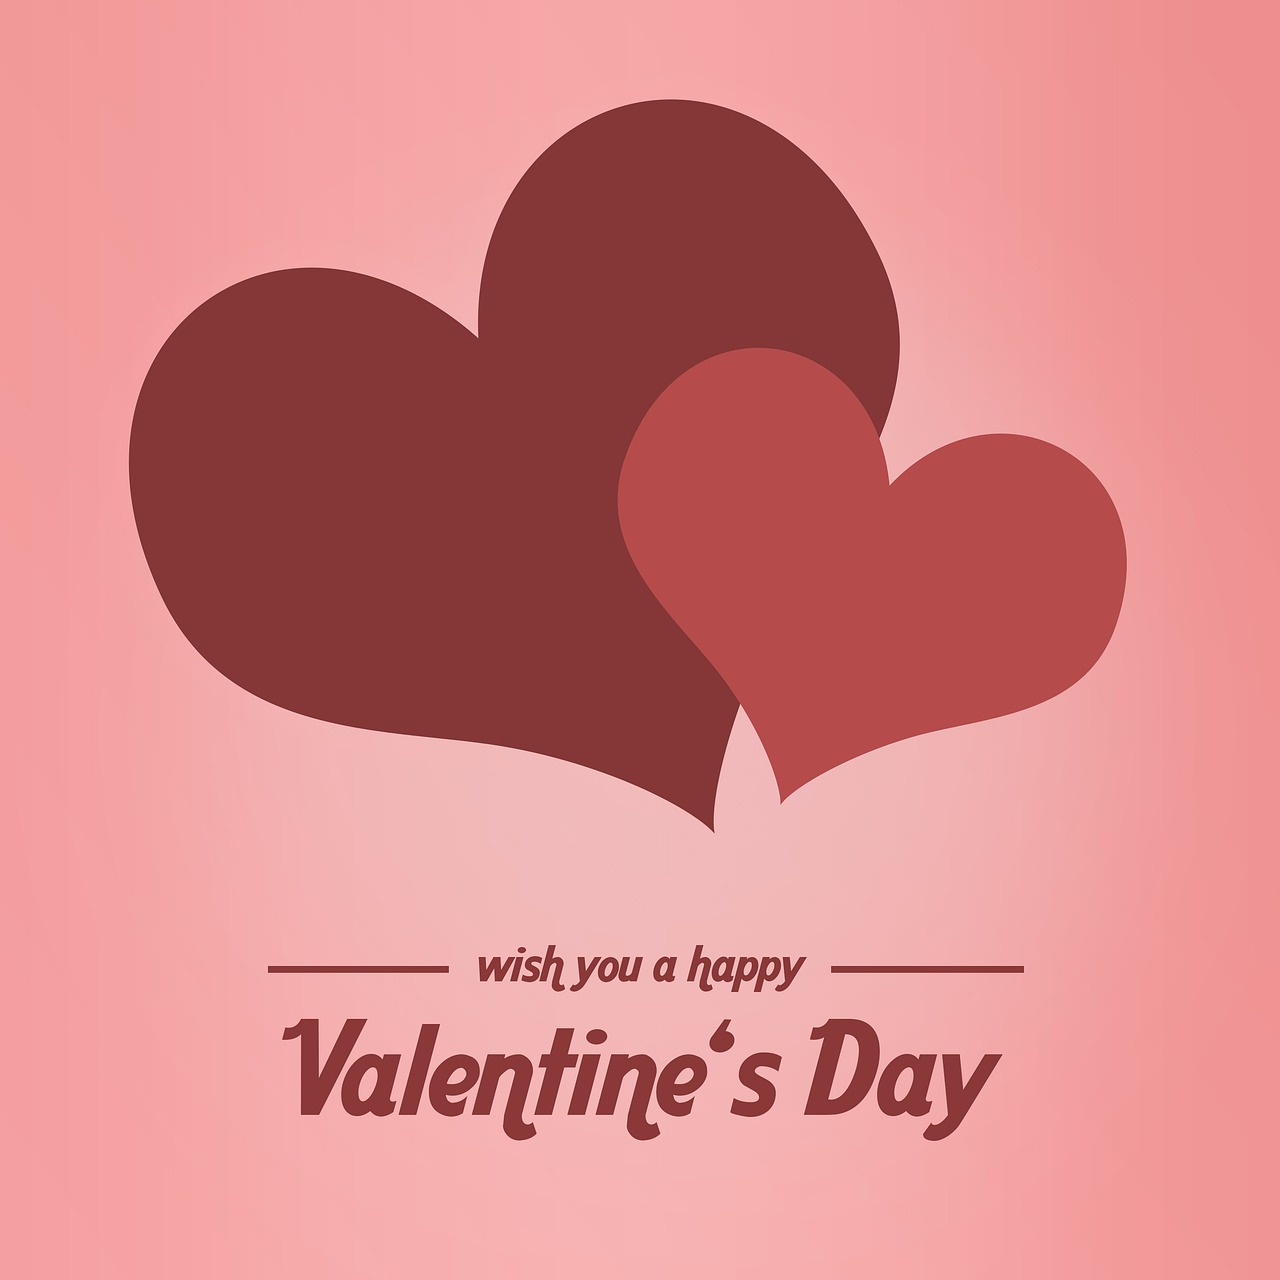 valentine's day saint valentine's day valentine's day wishes free photo